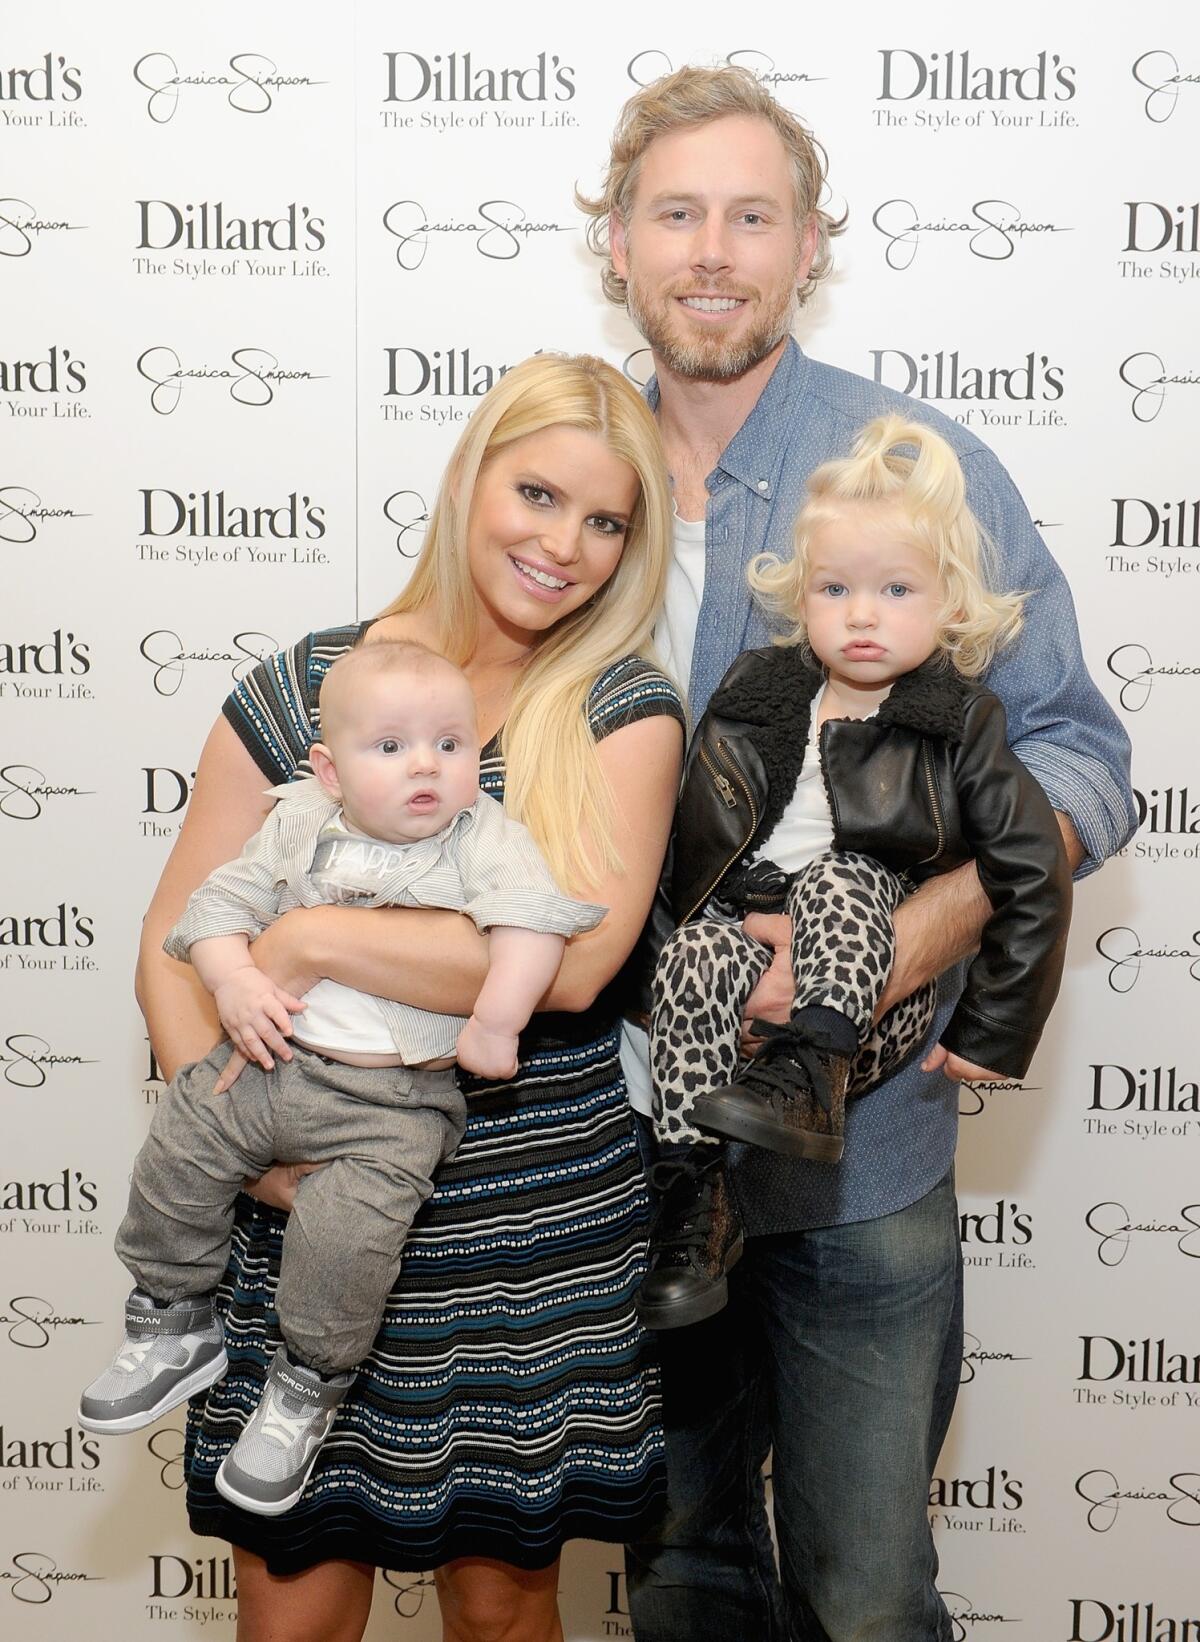 Jessica Simpson shows off her family at a Jessica Simpson Collection event at Dillard's in Dallas last month. From left are baby Ace Johnson, Simpson, her fiance Eric Johnson and toddler Maxwell Johnson.